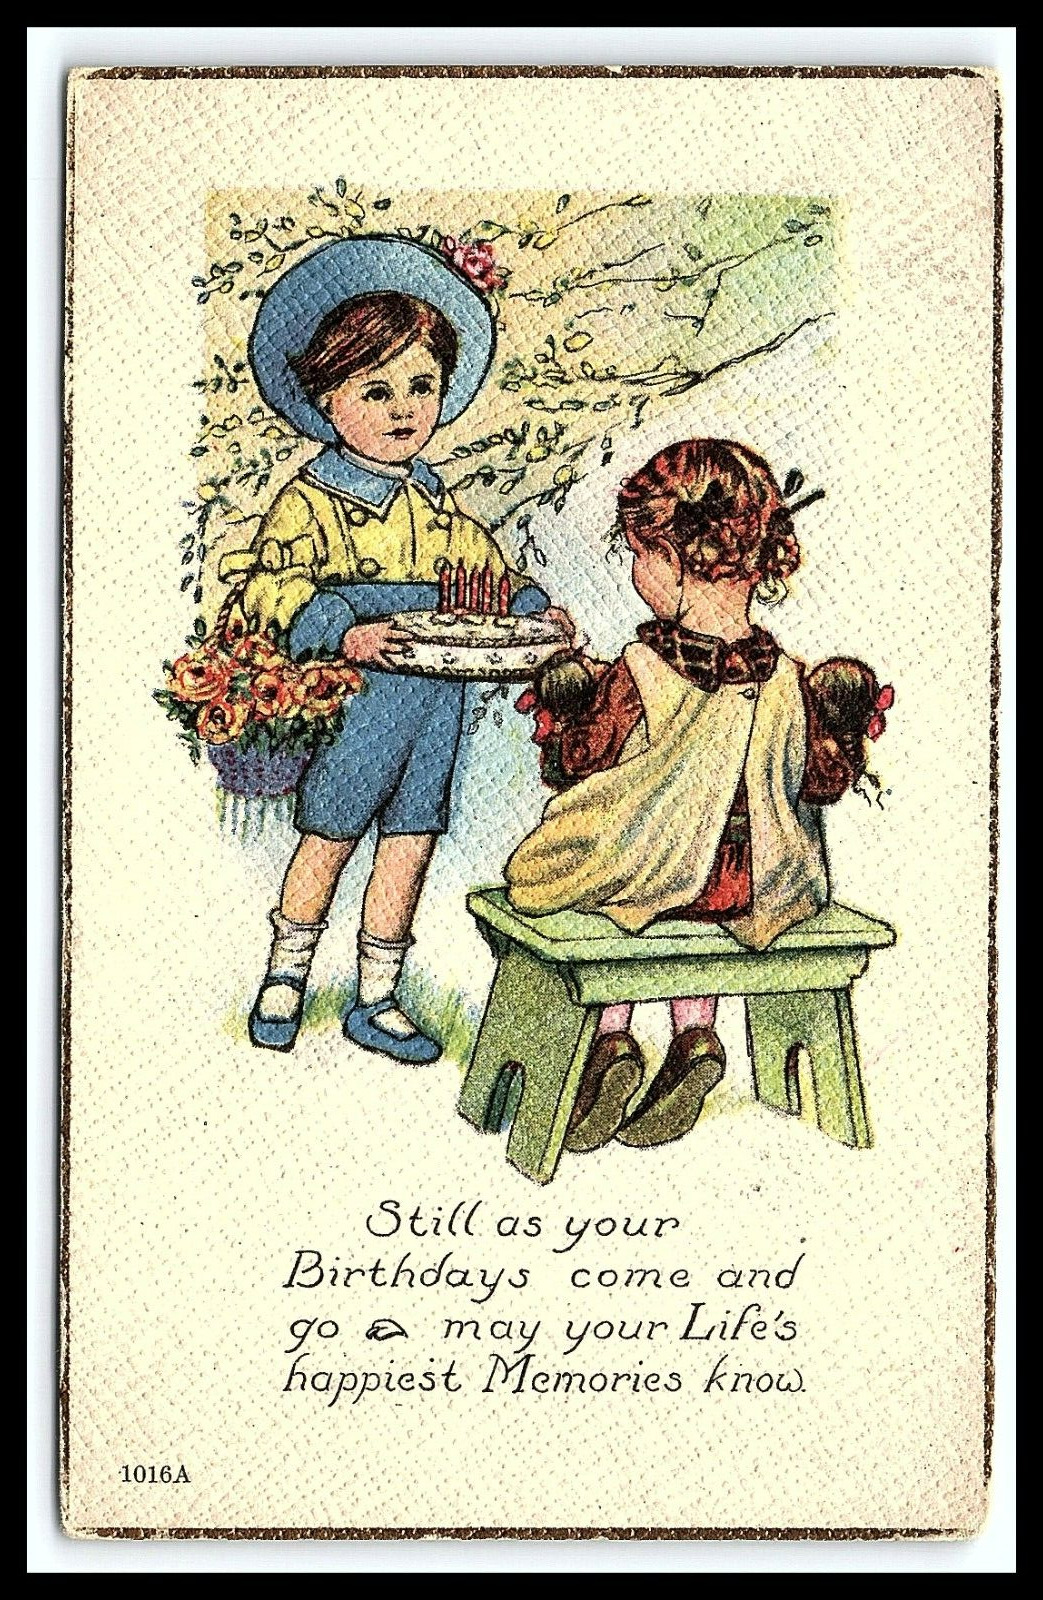 Birthday Greetings Postcard Posted 1922 Still As Your birthdays Come an Go pc137